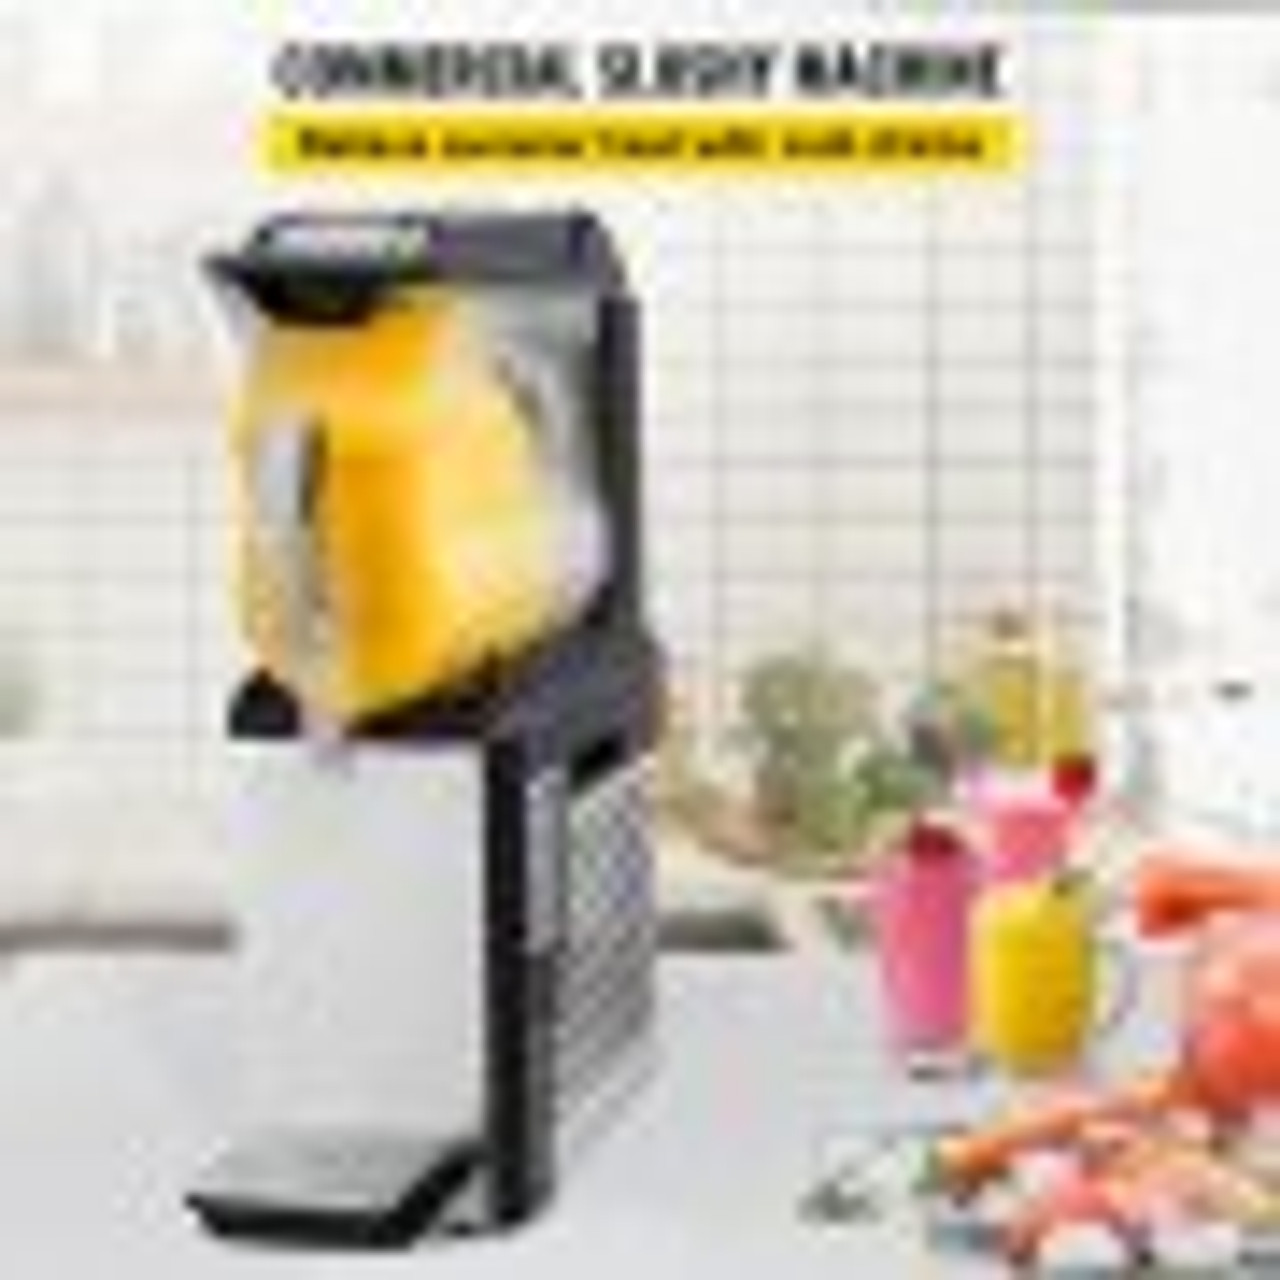 110V Slushy Machine 10L Margarita Frozen Drink Maker 600W Automatic Clean Day and Night Modes for Supermarkets Cafes Restaurants Snack Bars Commercial Use